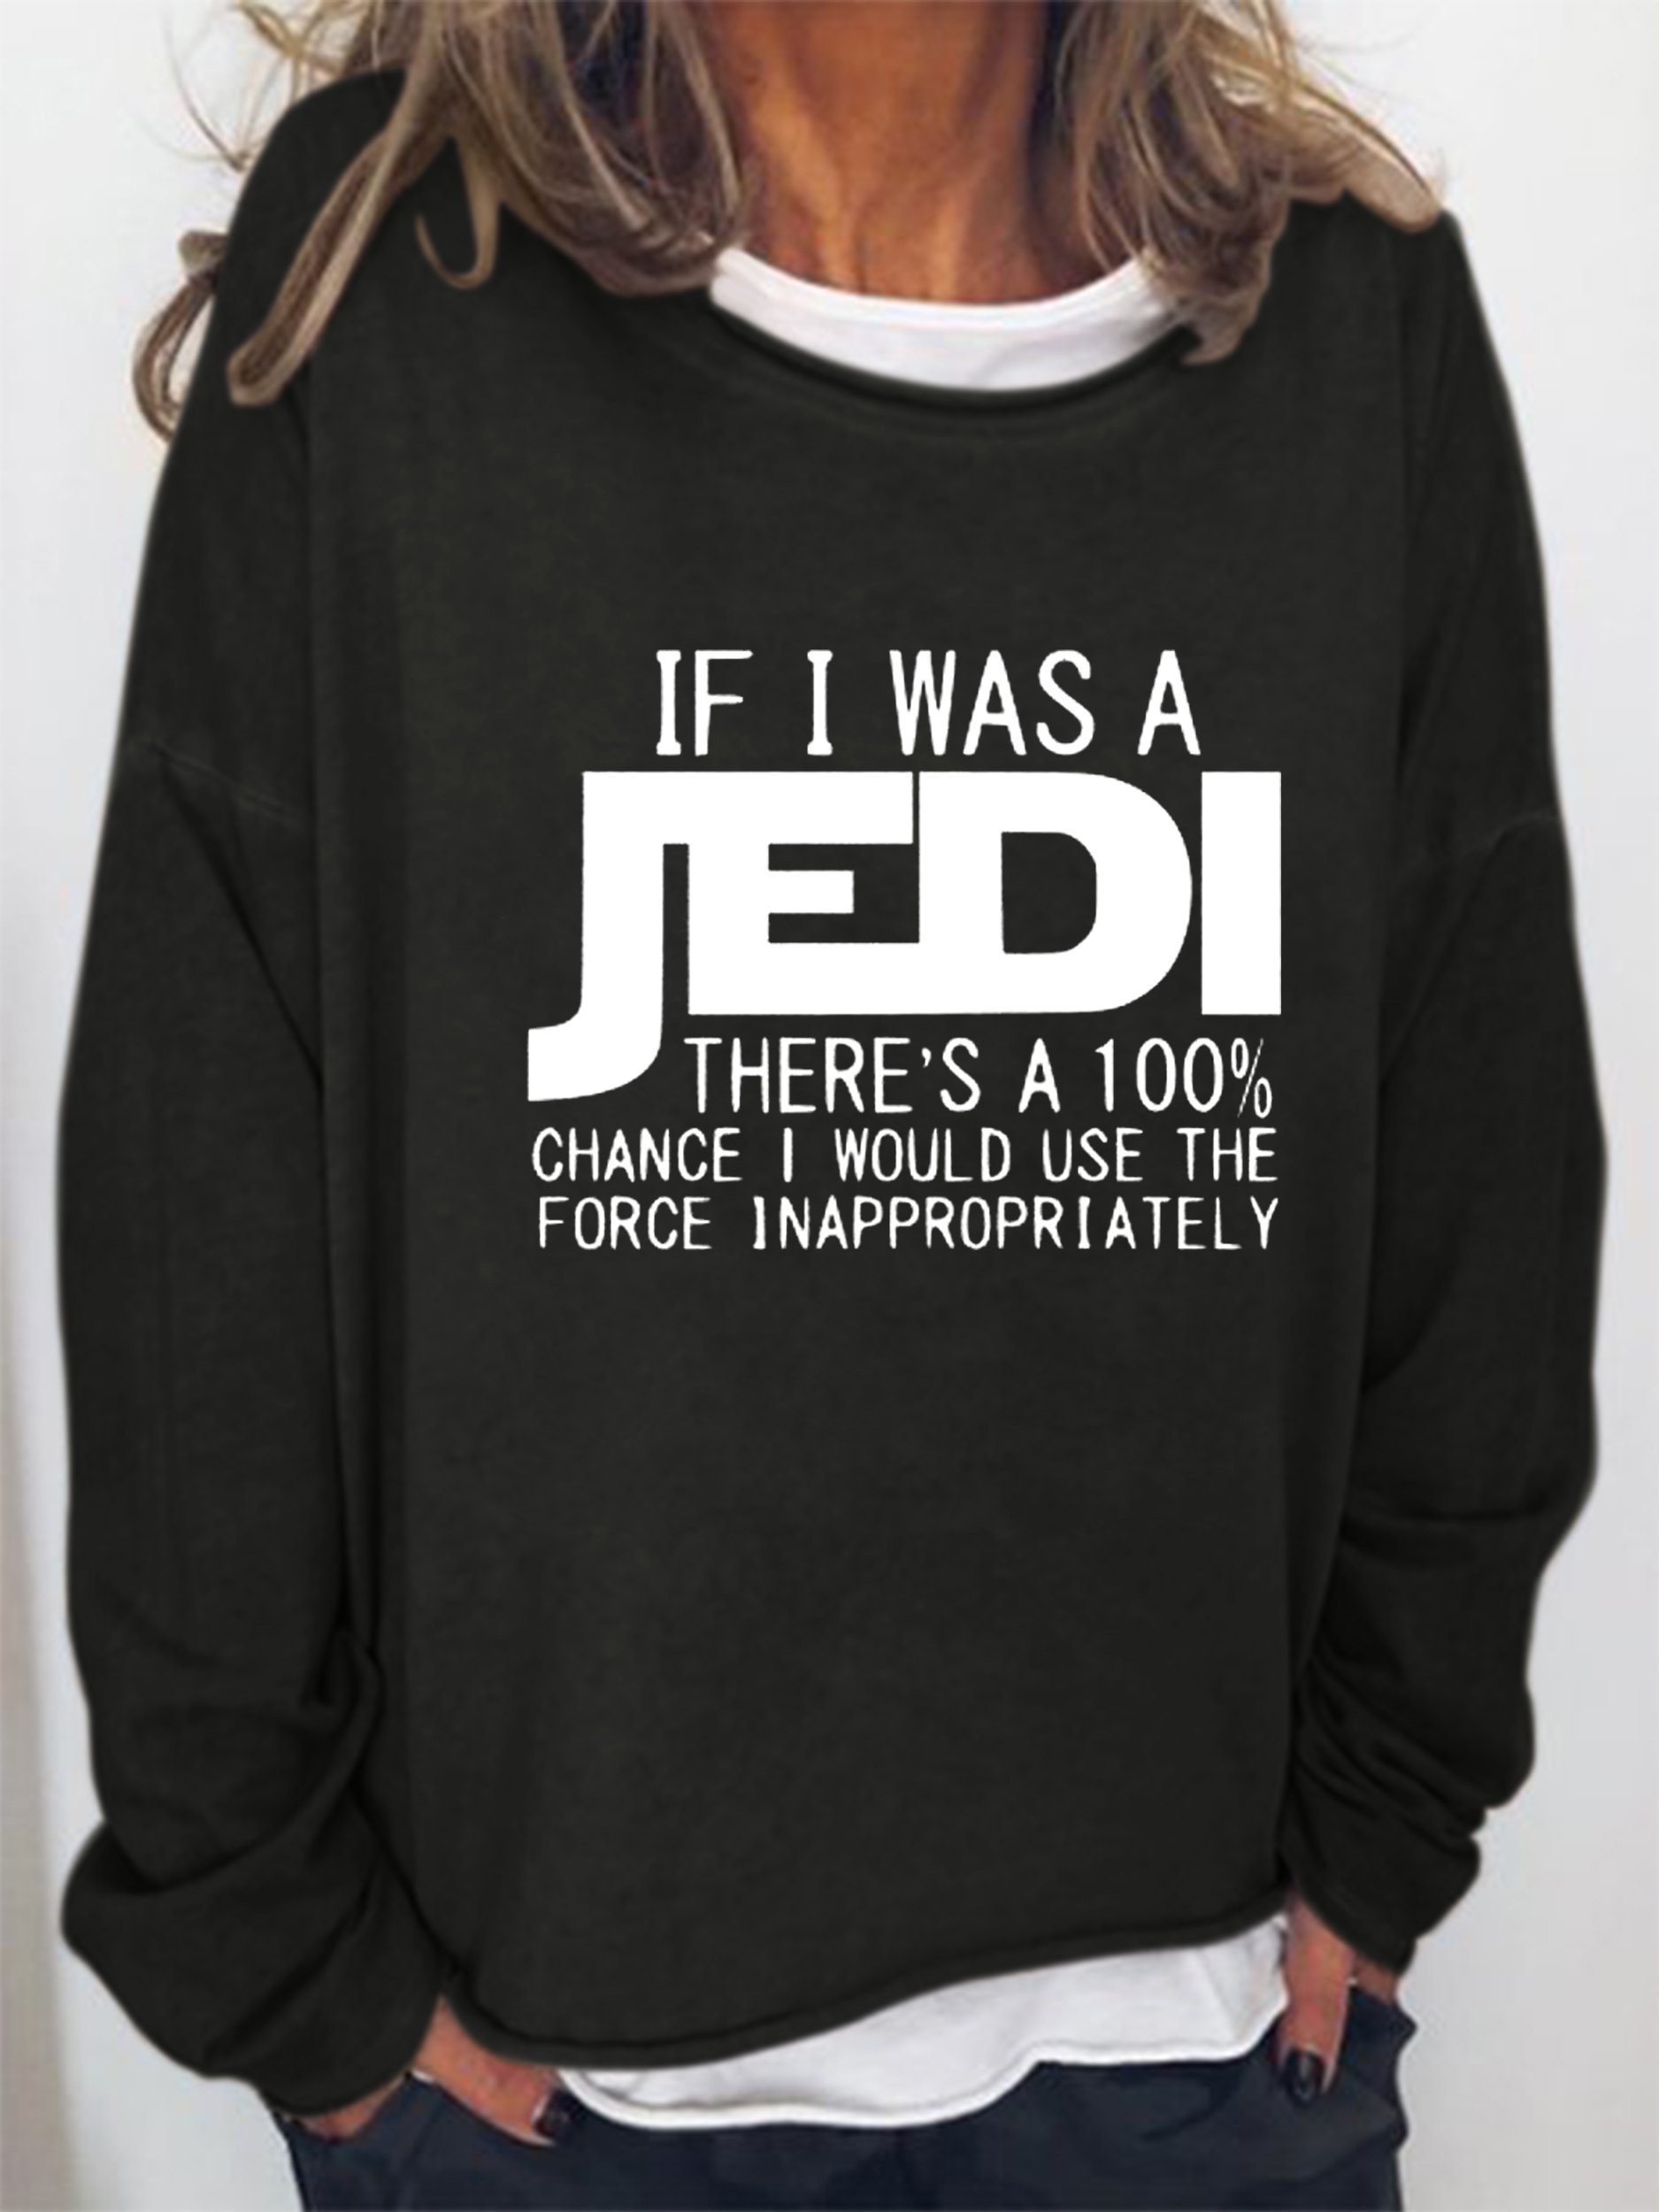 If I Was A Jedi I'd Use The Force Inappropriately Sweatshirt